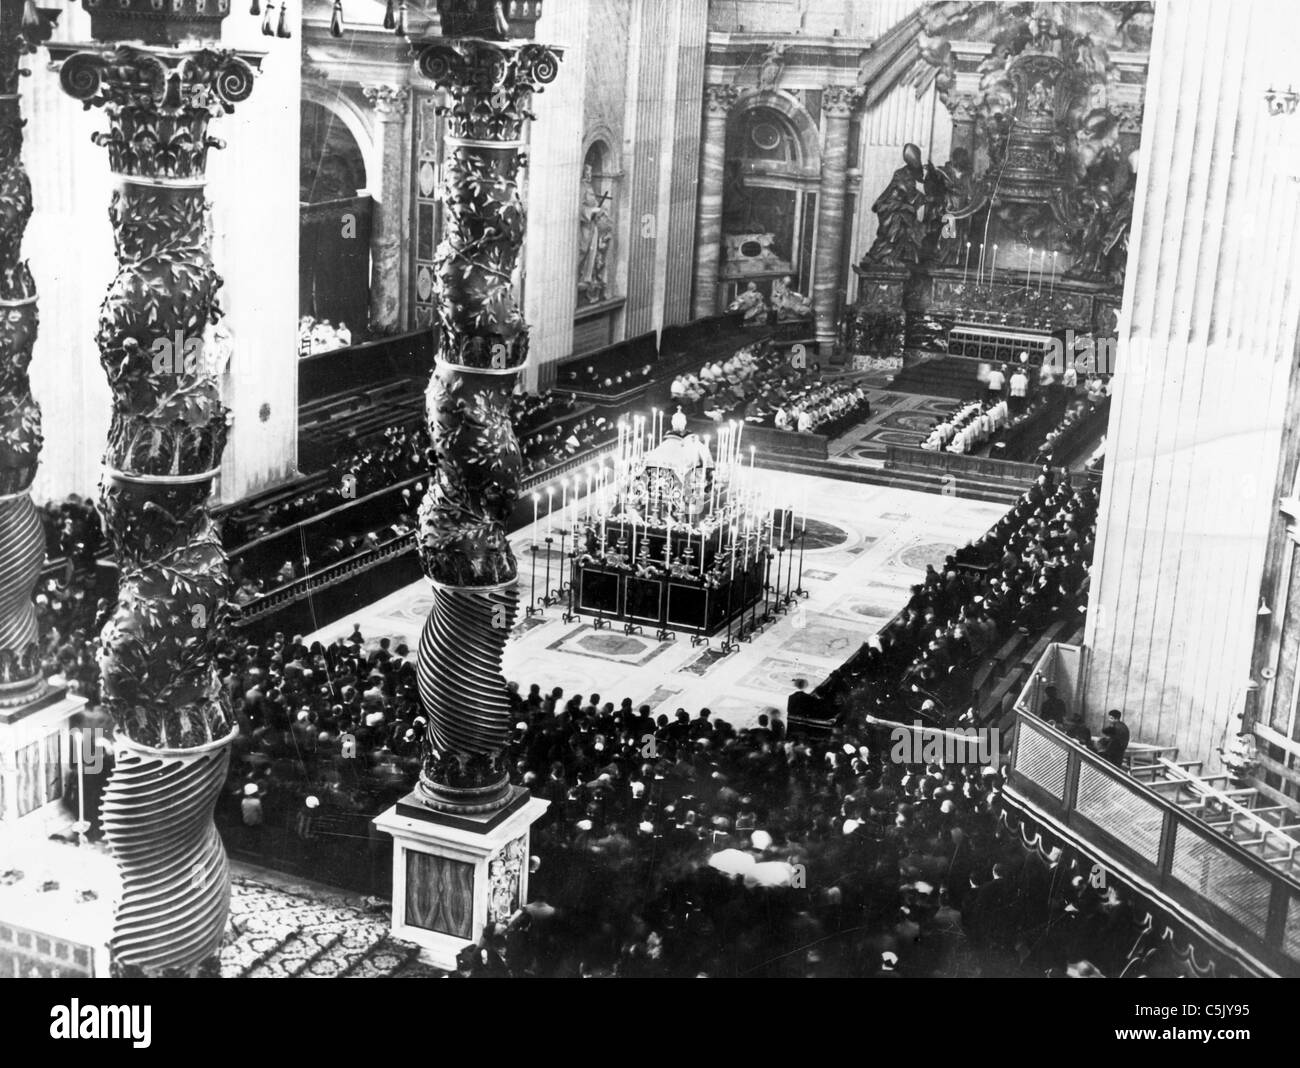 The funeral of Pope Pius XII in St. Peter's, Rome, 1939 Stock Photo